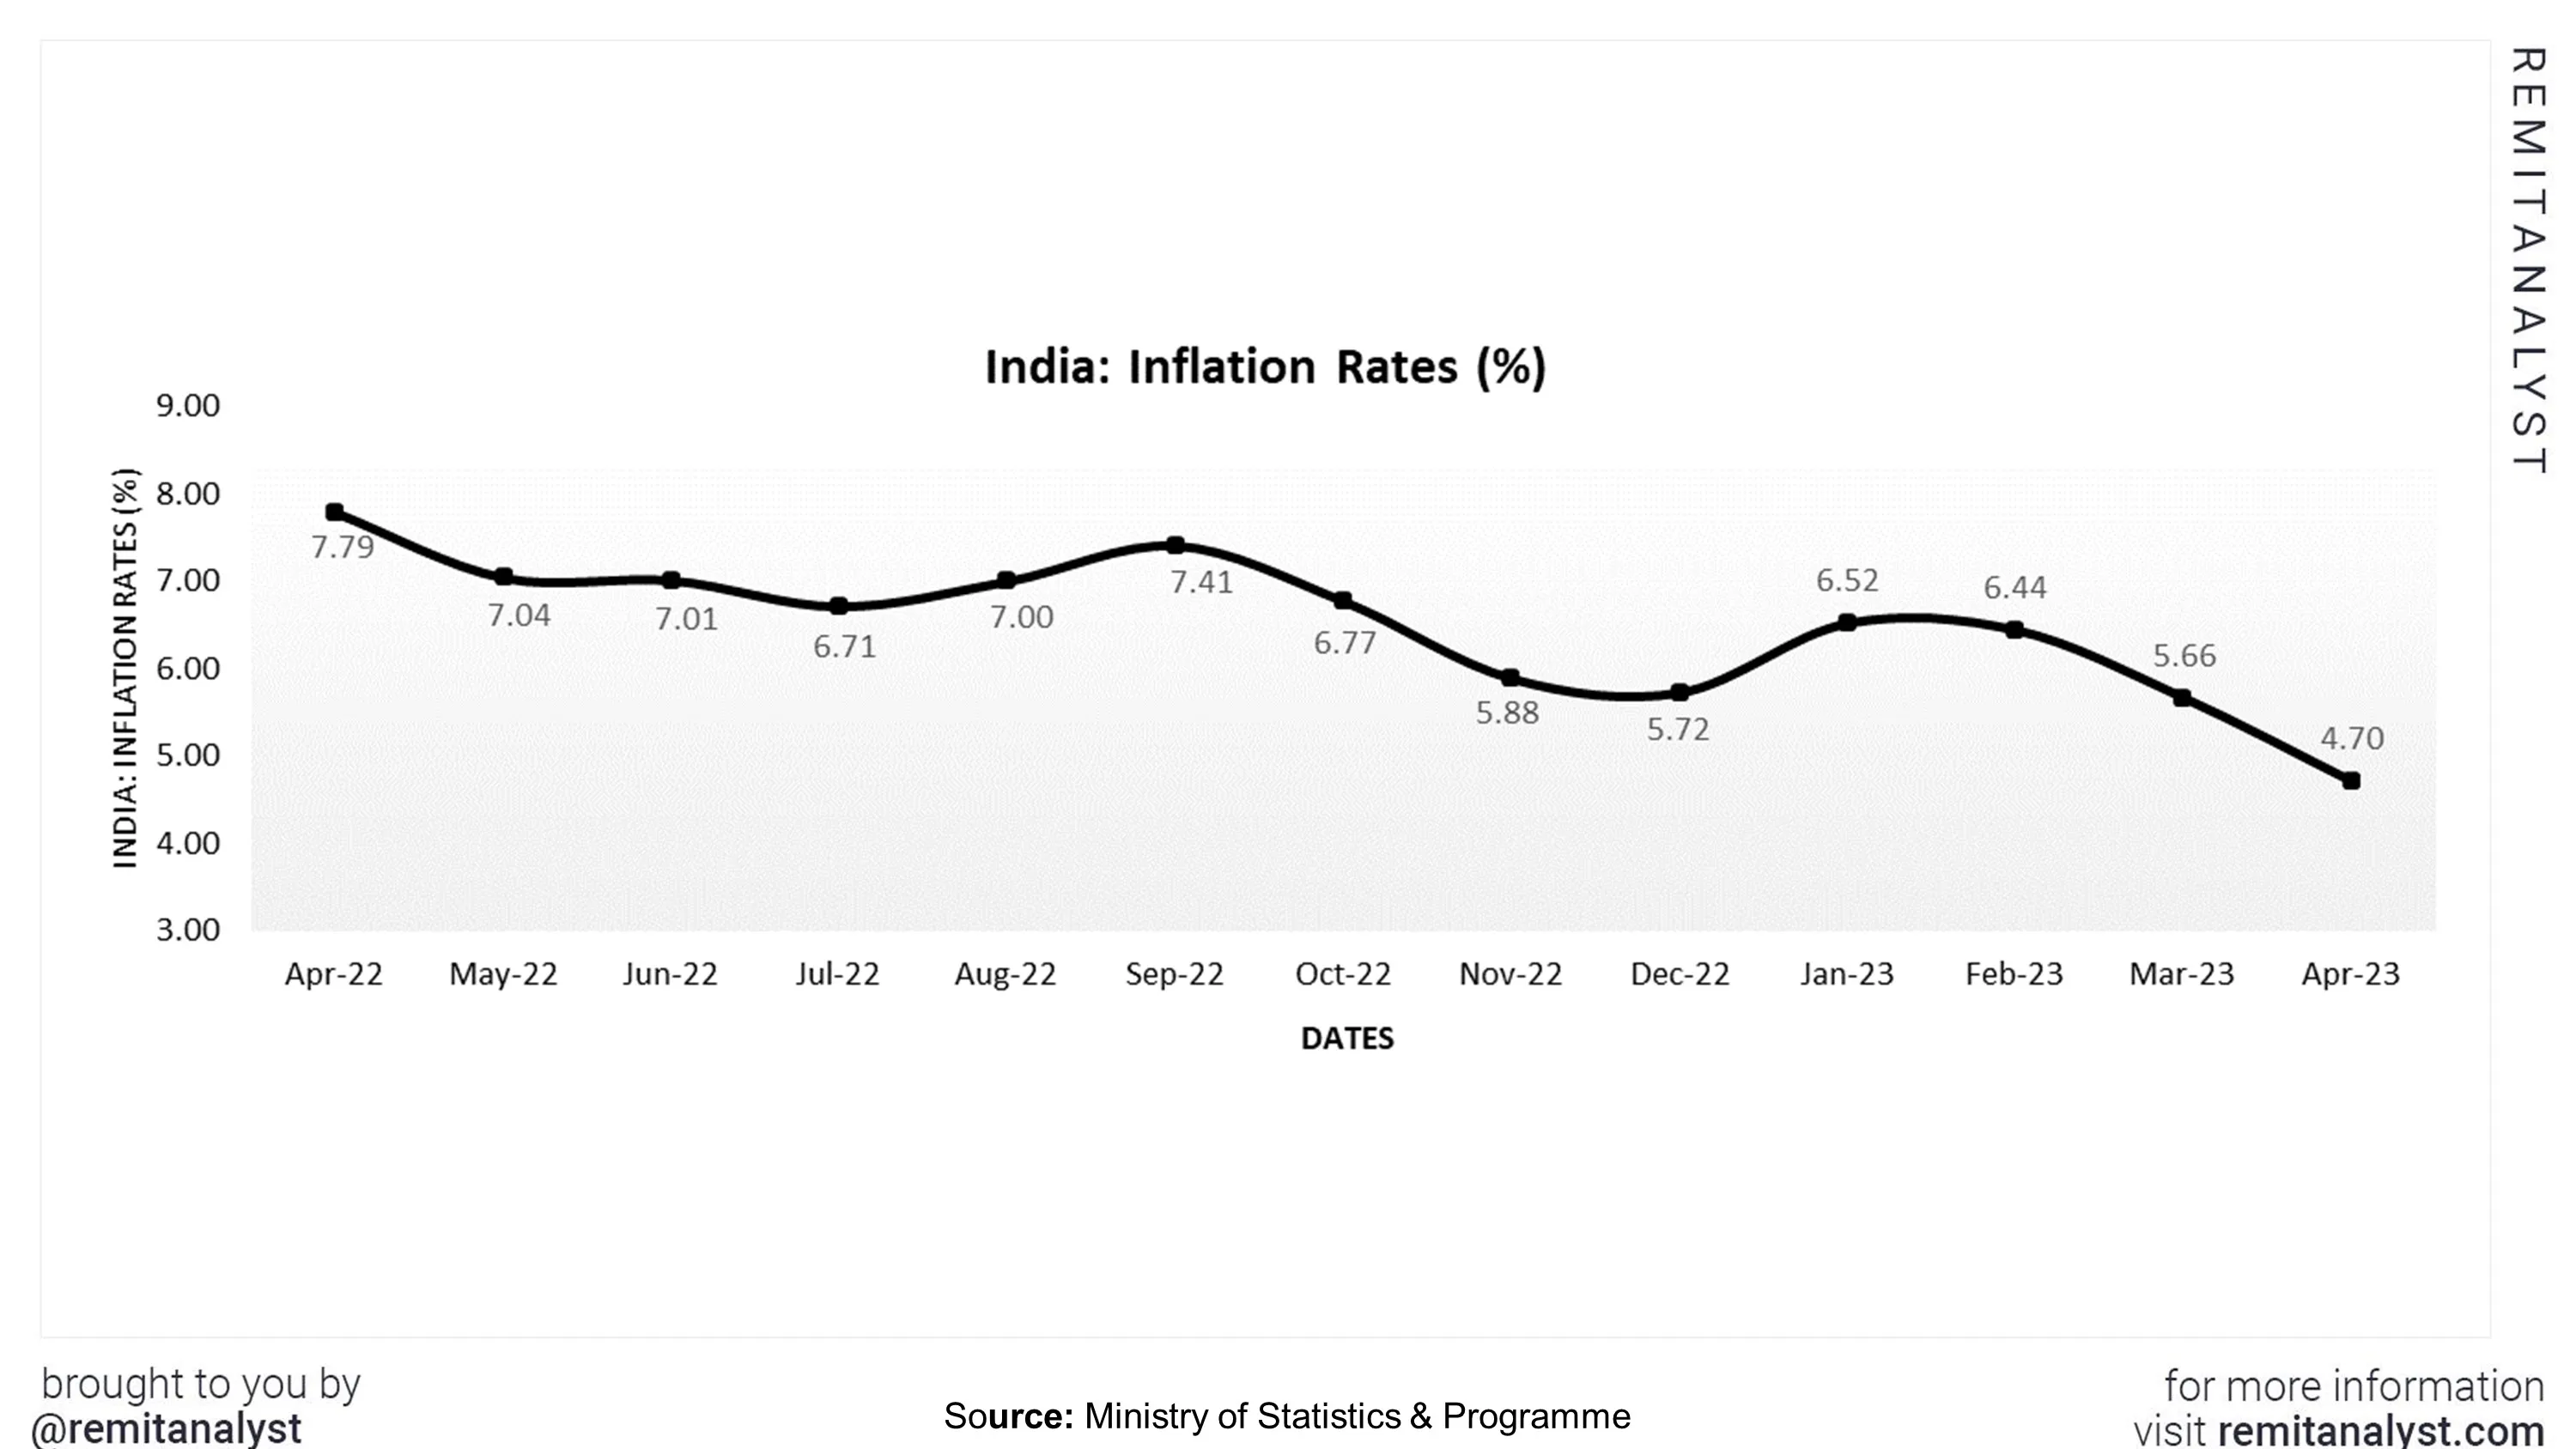 inflation-rates-india-from-apr-2022-to-apr-2023